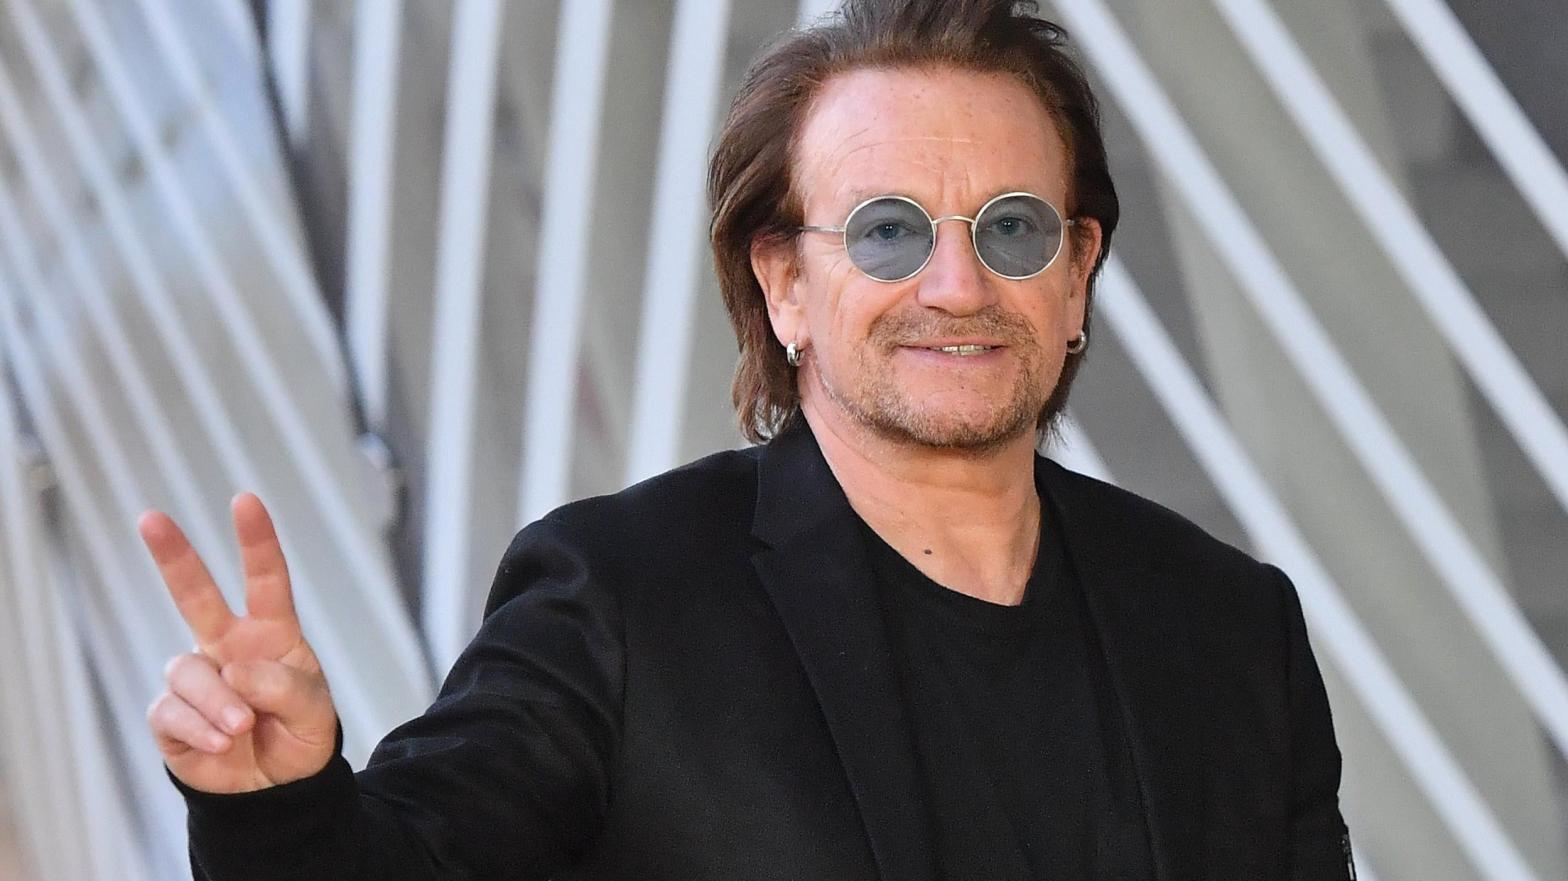 Bono suggested the idea of giving away the album for free in 2014 to Tim Cook. (Image: Emmanuel Dunand, Getty Images)